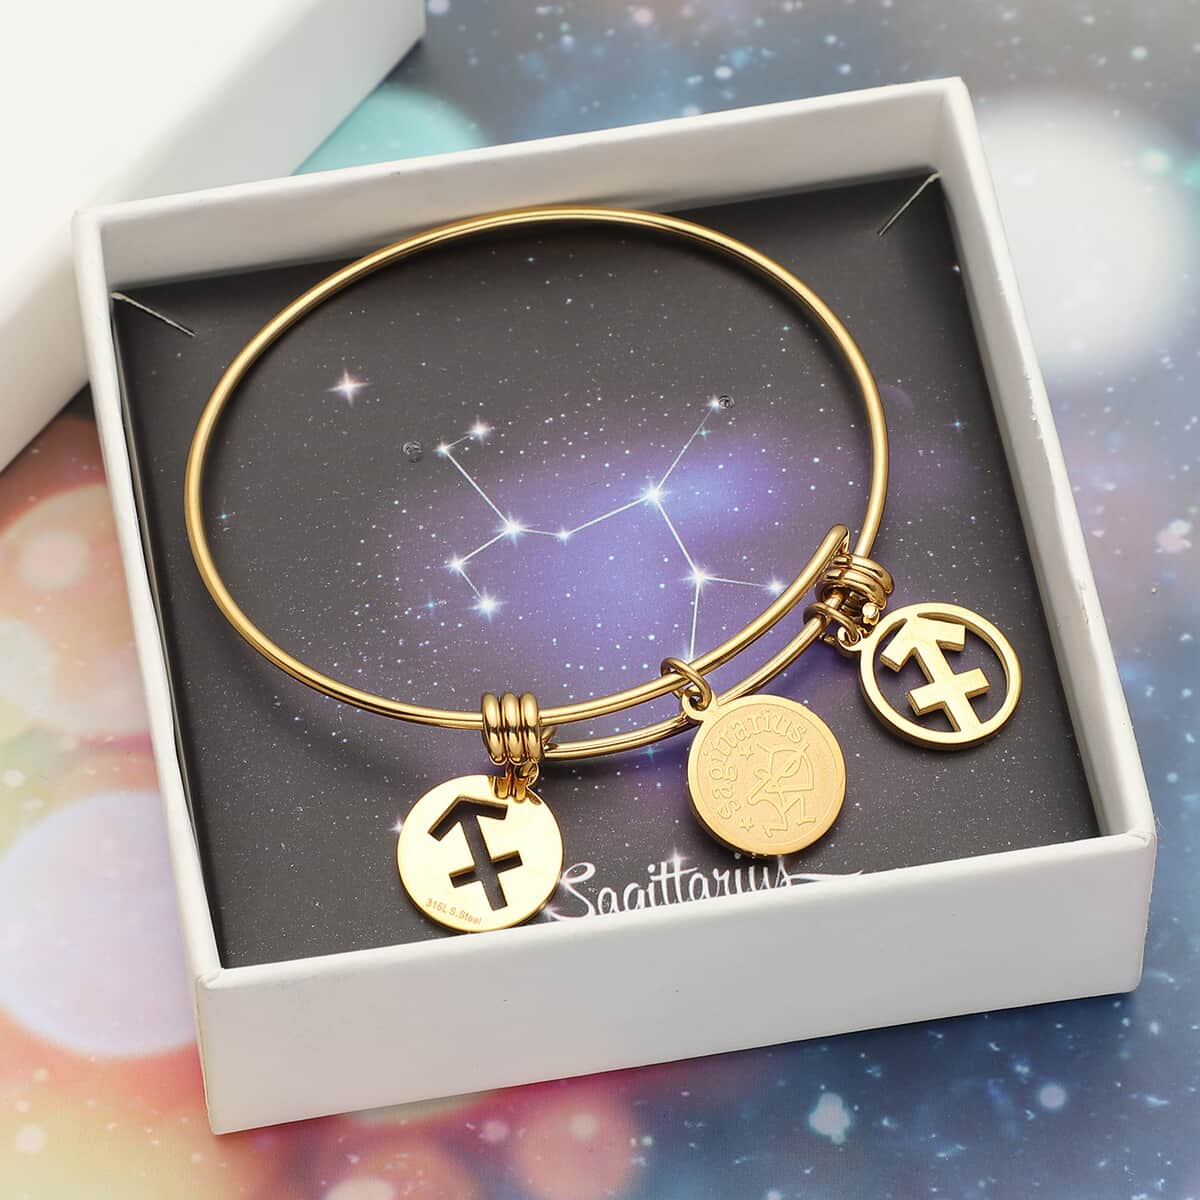 Sagittarius Zodiac Bangle Bracelet Gift Set in ION Plated Yellow Gold Stainless Steel (6-9 in) image number 0